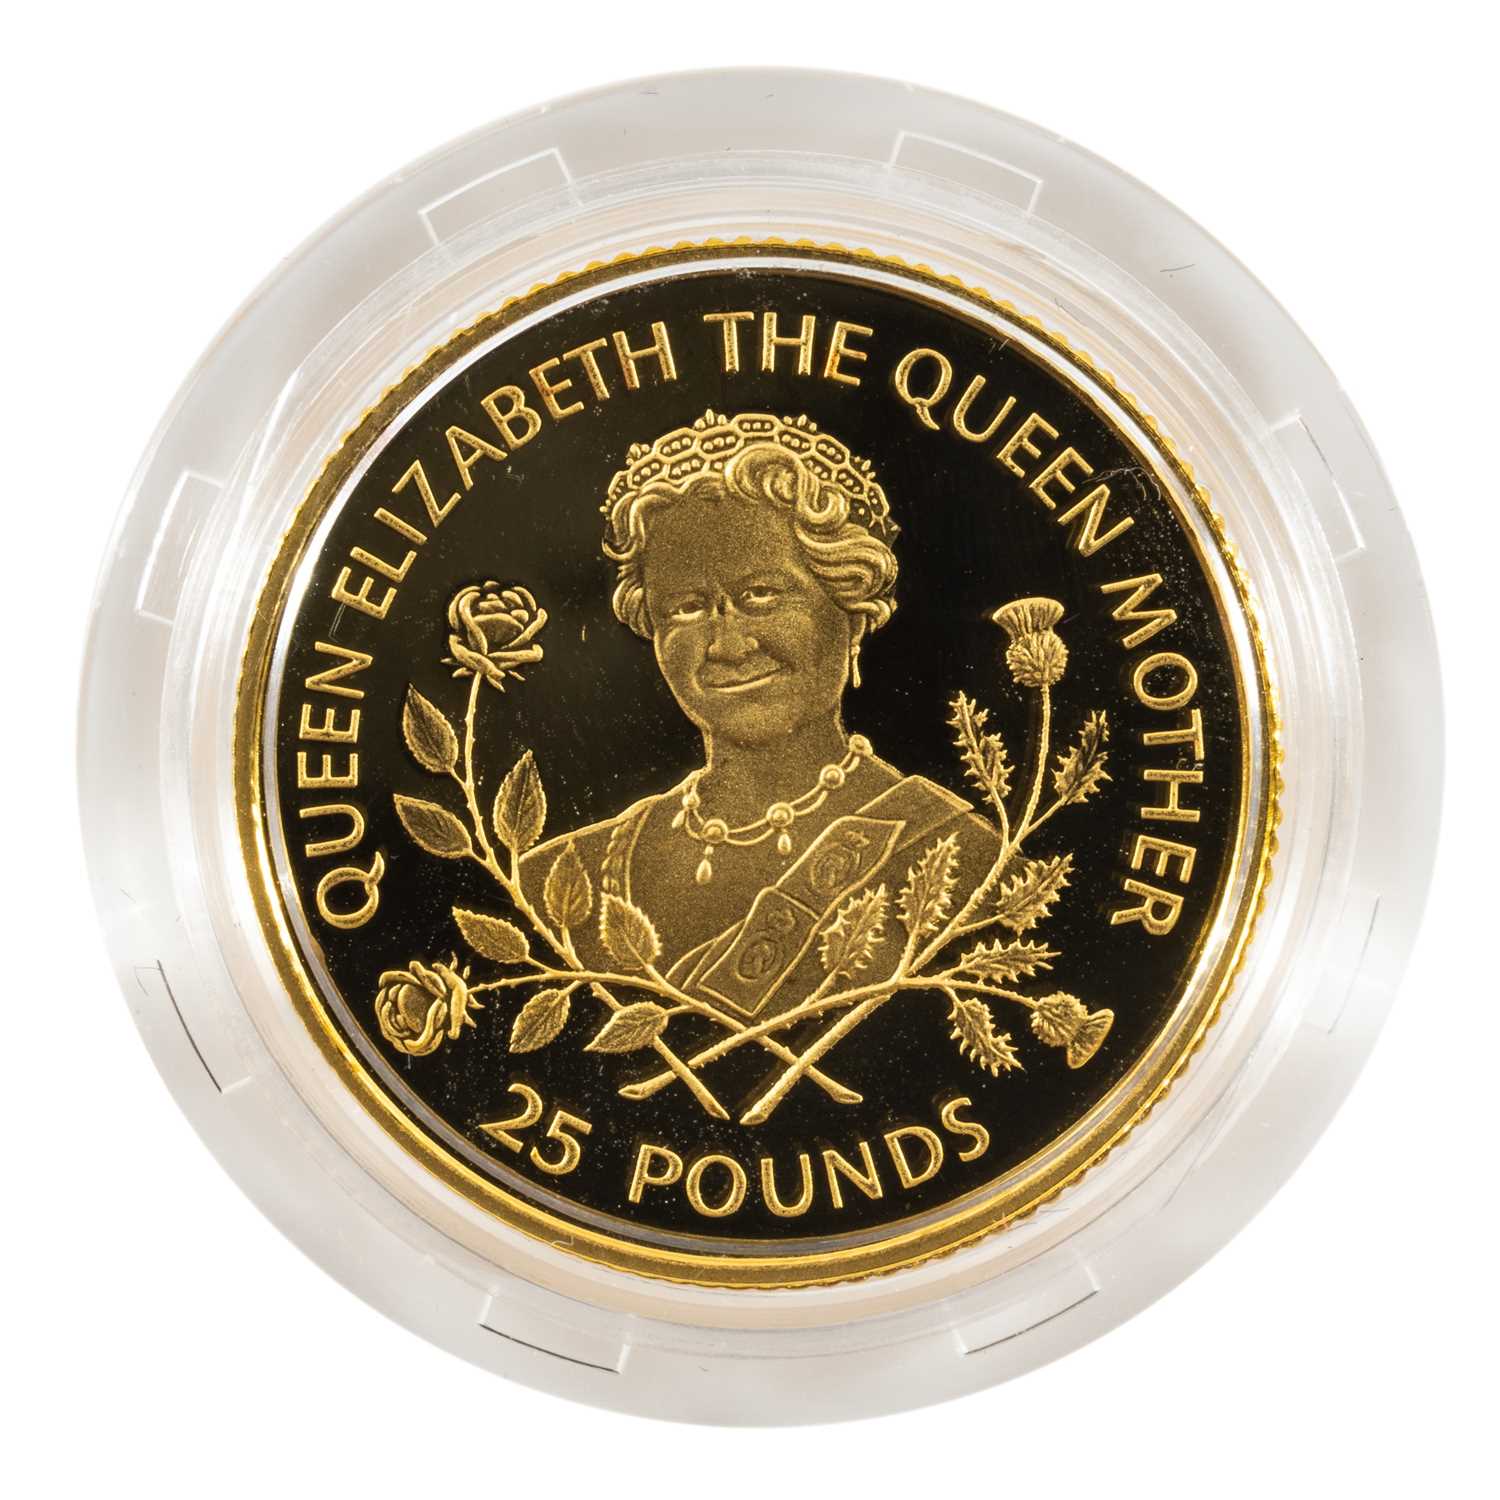 QUEEN ELIZABETH THE QUEEN MOTHER GUERNSEY 25 POUNDS GOLD COIN, 1995, 7.8gms Provenance: private - Image 2 of 2